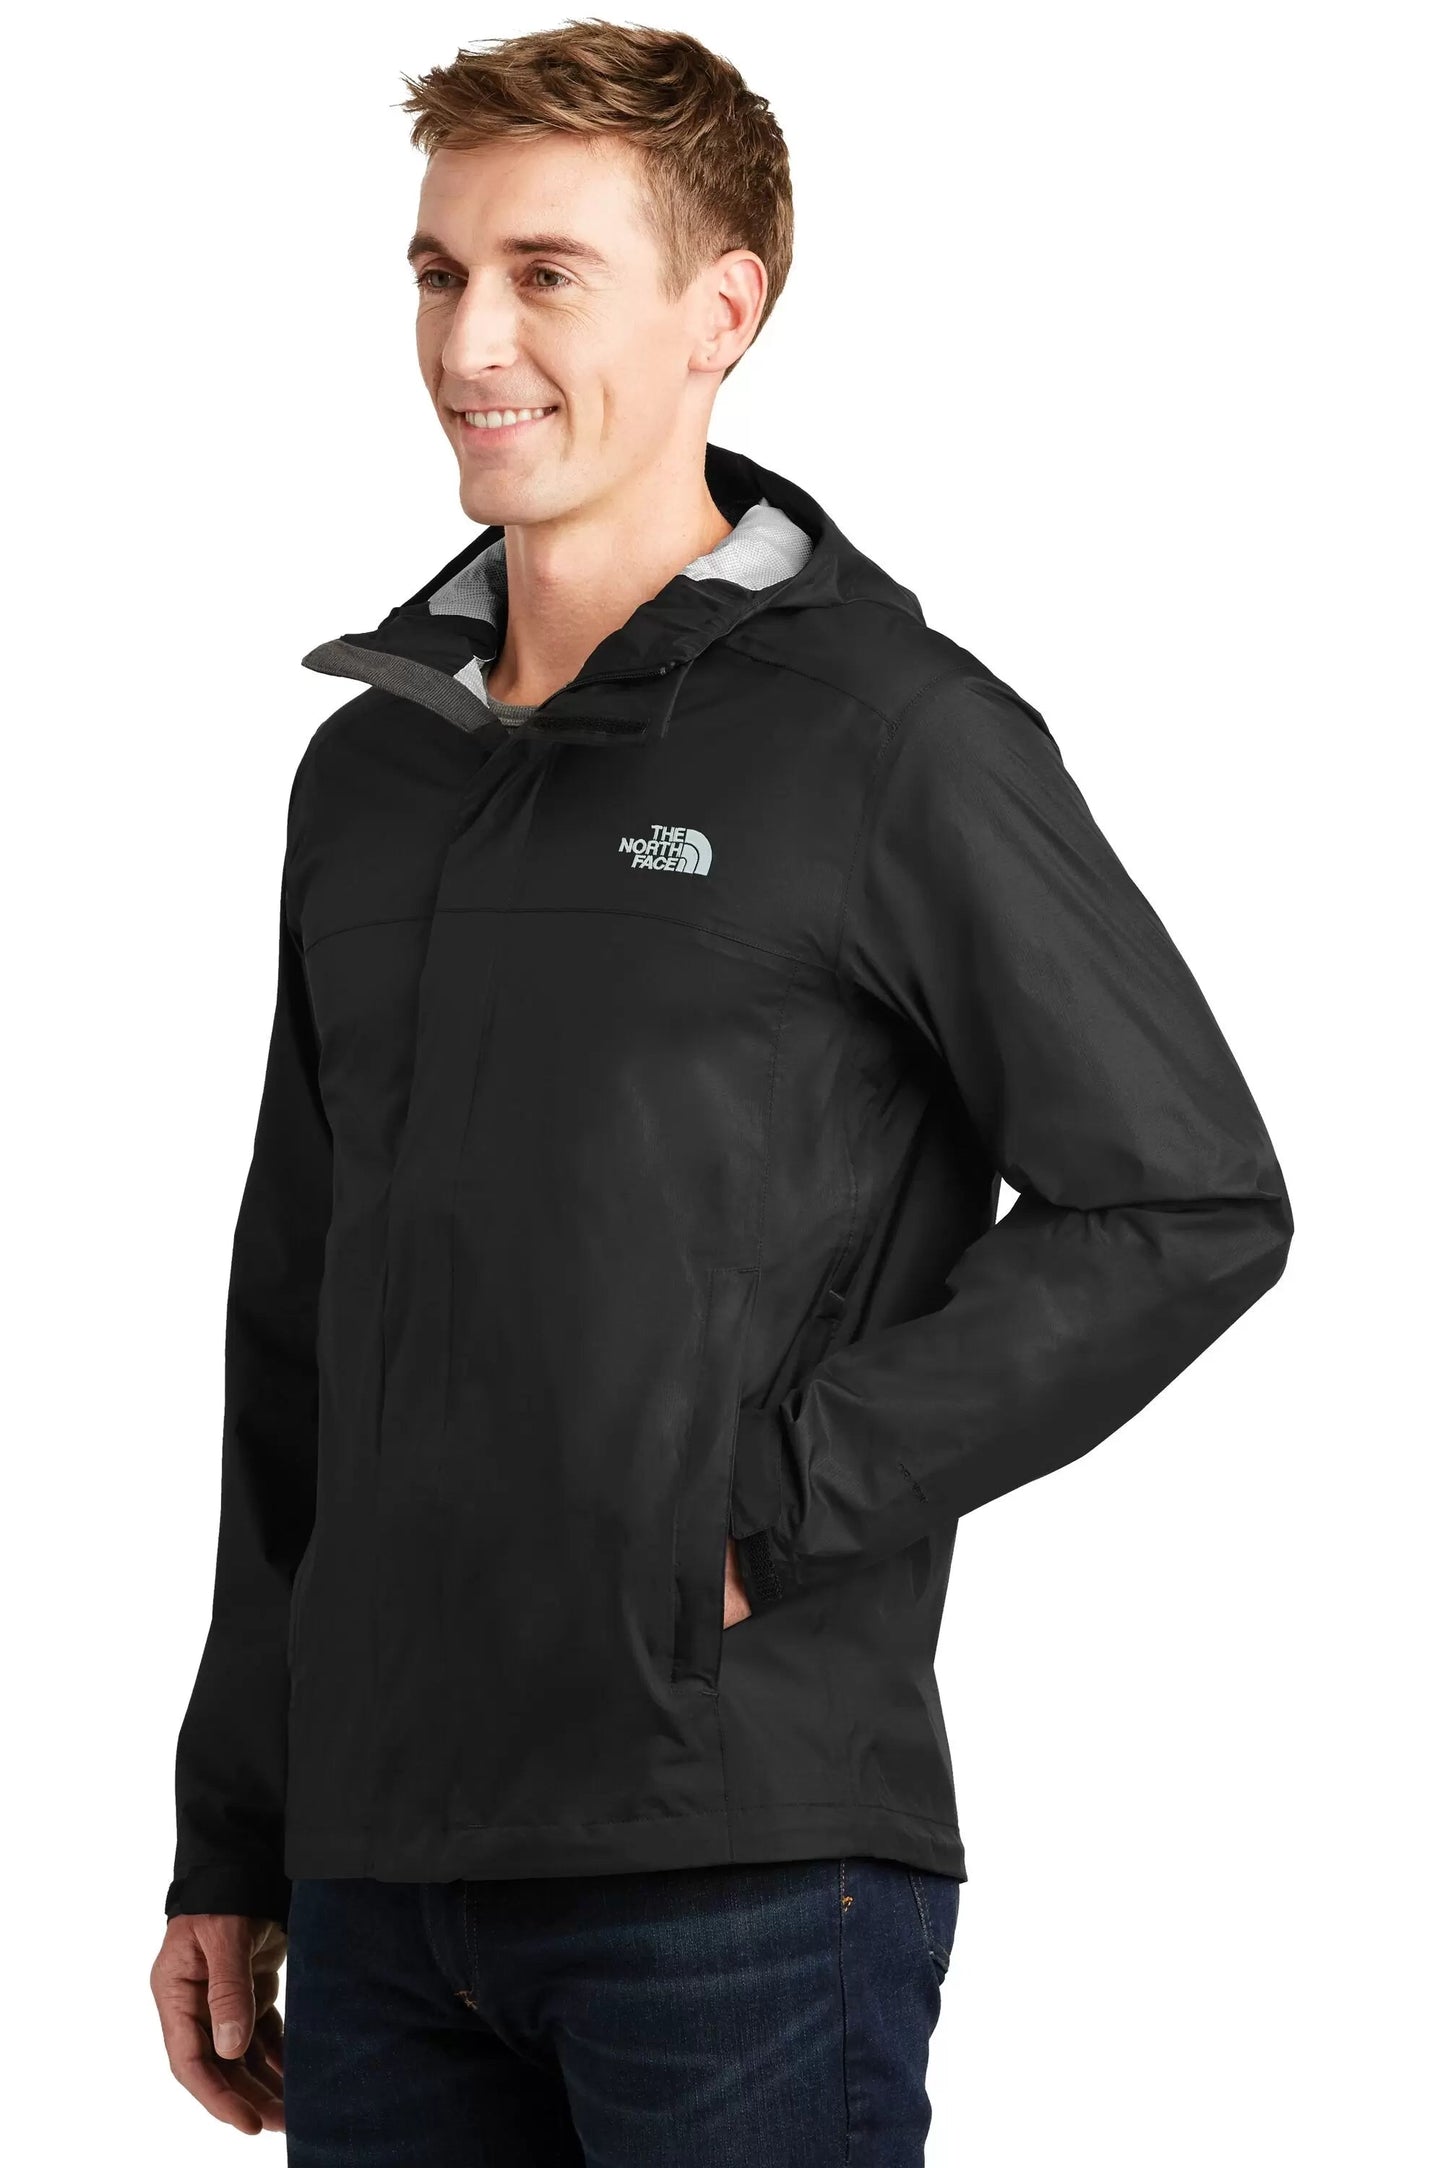 THE NORTH FACE® DRYVENT™ RAIN JACKET